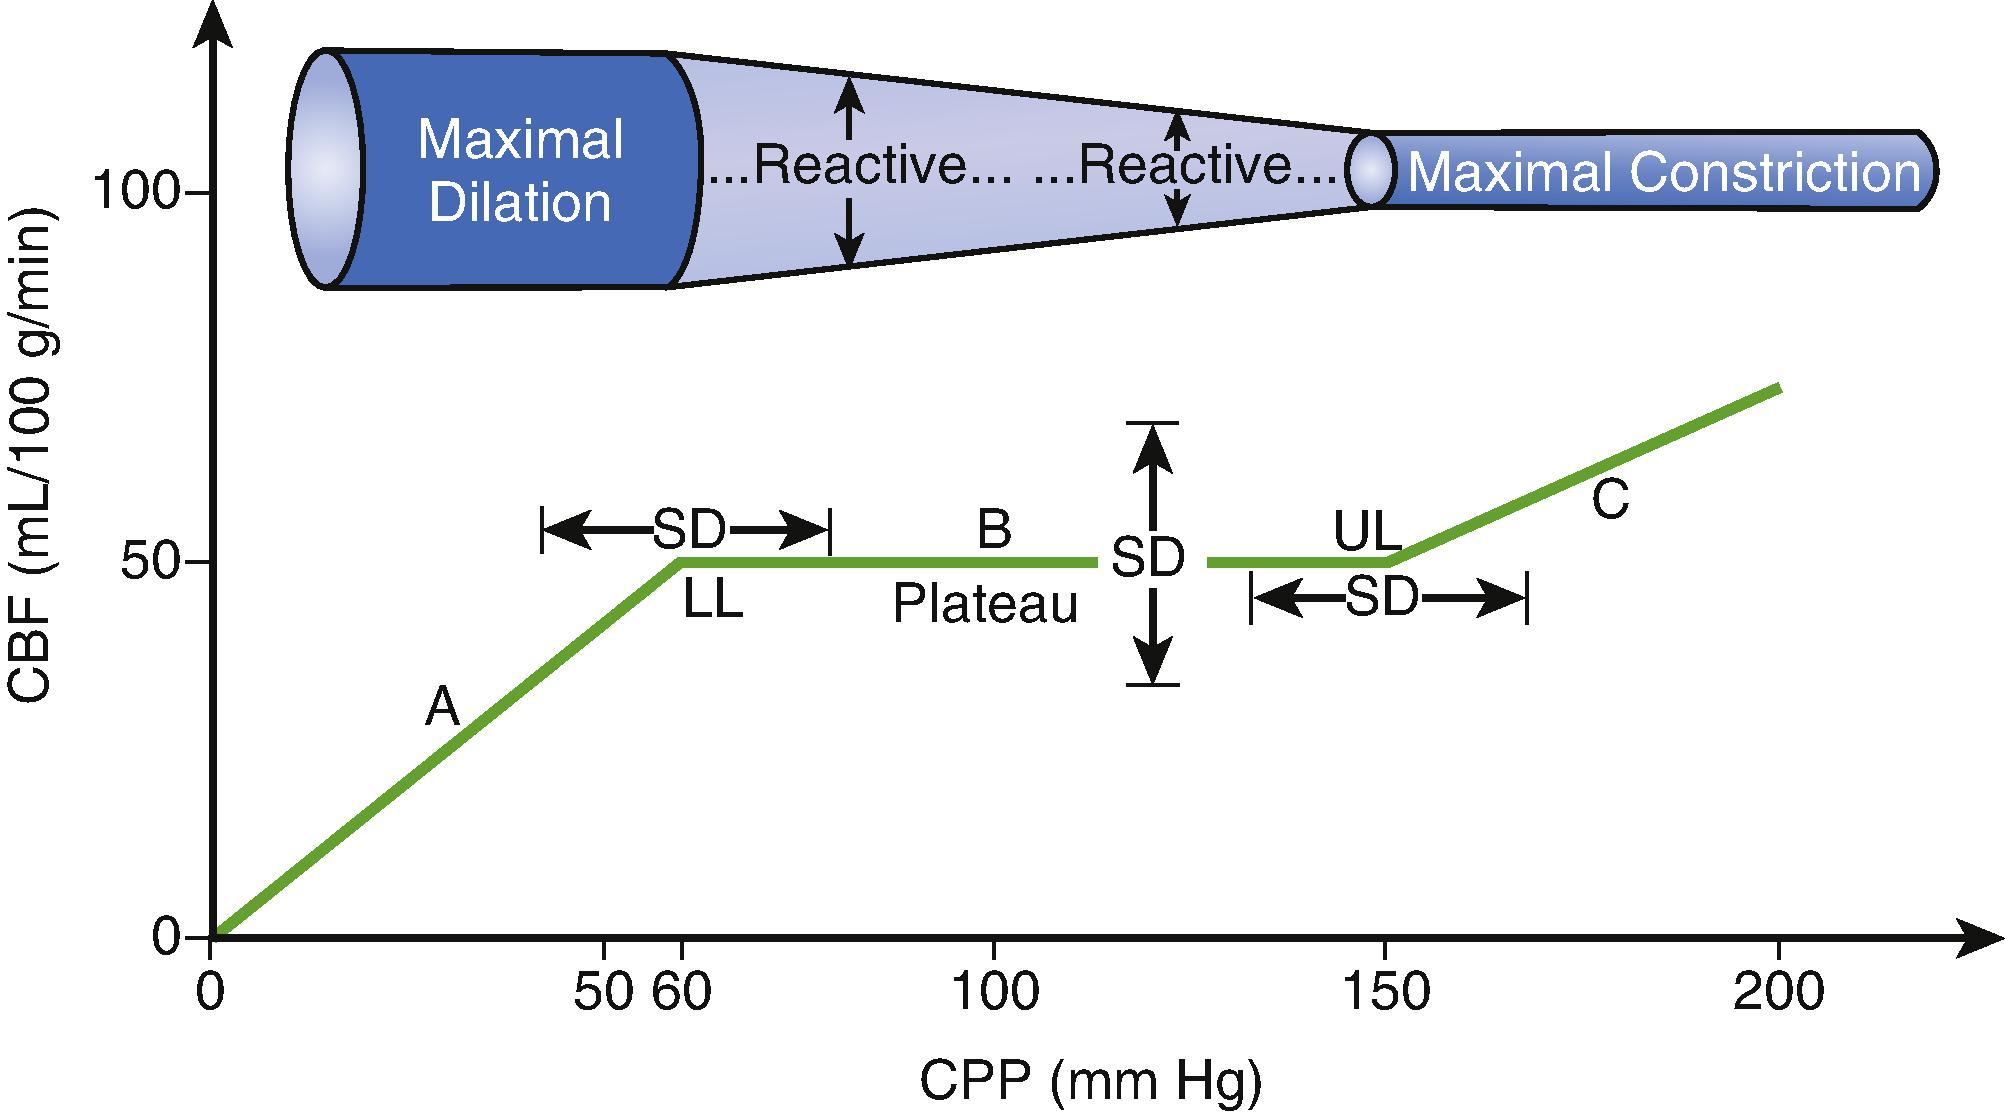 Fig. 30.2, Cerebral autoregulation describes the relationship between cerebral blood flow (CBF) and cerebral perfusion pressure ( CPP ). The three key elements of an autoregulation curve are the lower limit ( LL ), the upper limit ( UL ), and the plateau. CBF remains stable in the CPP range between the lower and upper limits and is pressure passive beyond this range. The frequently quoted numbers are the lower limit = 60 mm Hg, the upper limit = 150 mm Hg, and the plateau = 50 mL/100 g/min. However, these numbers may not be representative of all patients, and these parameters may vary, as indicated by the standard deviation ( SD ) in this illustration, especially in the context of poorly controlled hypertension. The cerebrovascular reactivity is also illustrated. (Figure 1 of Reference 1) 1